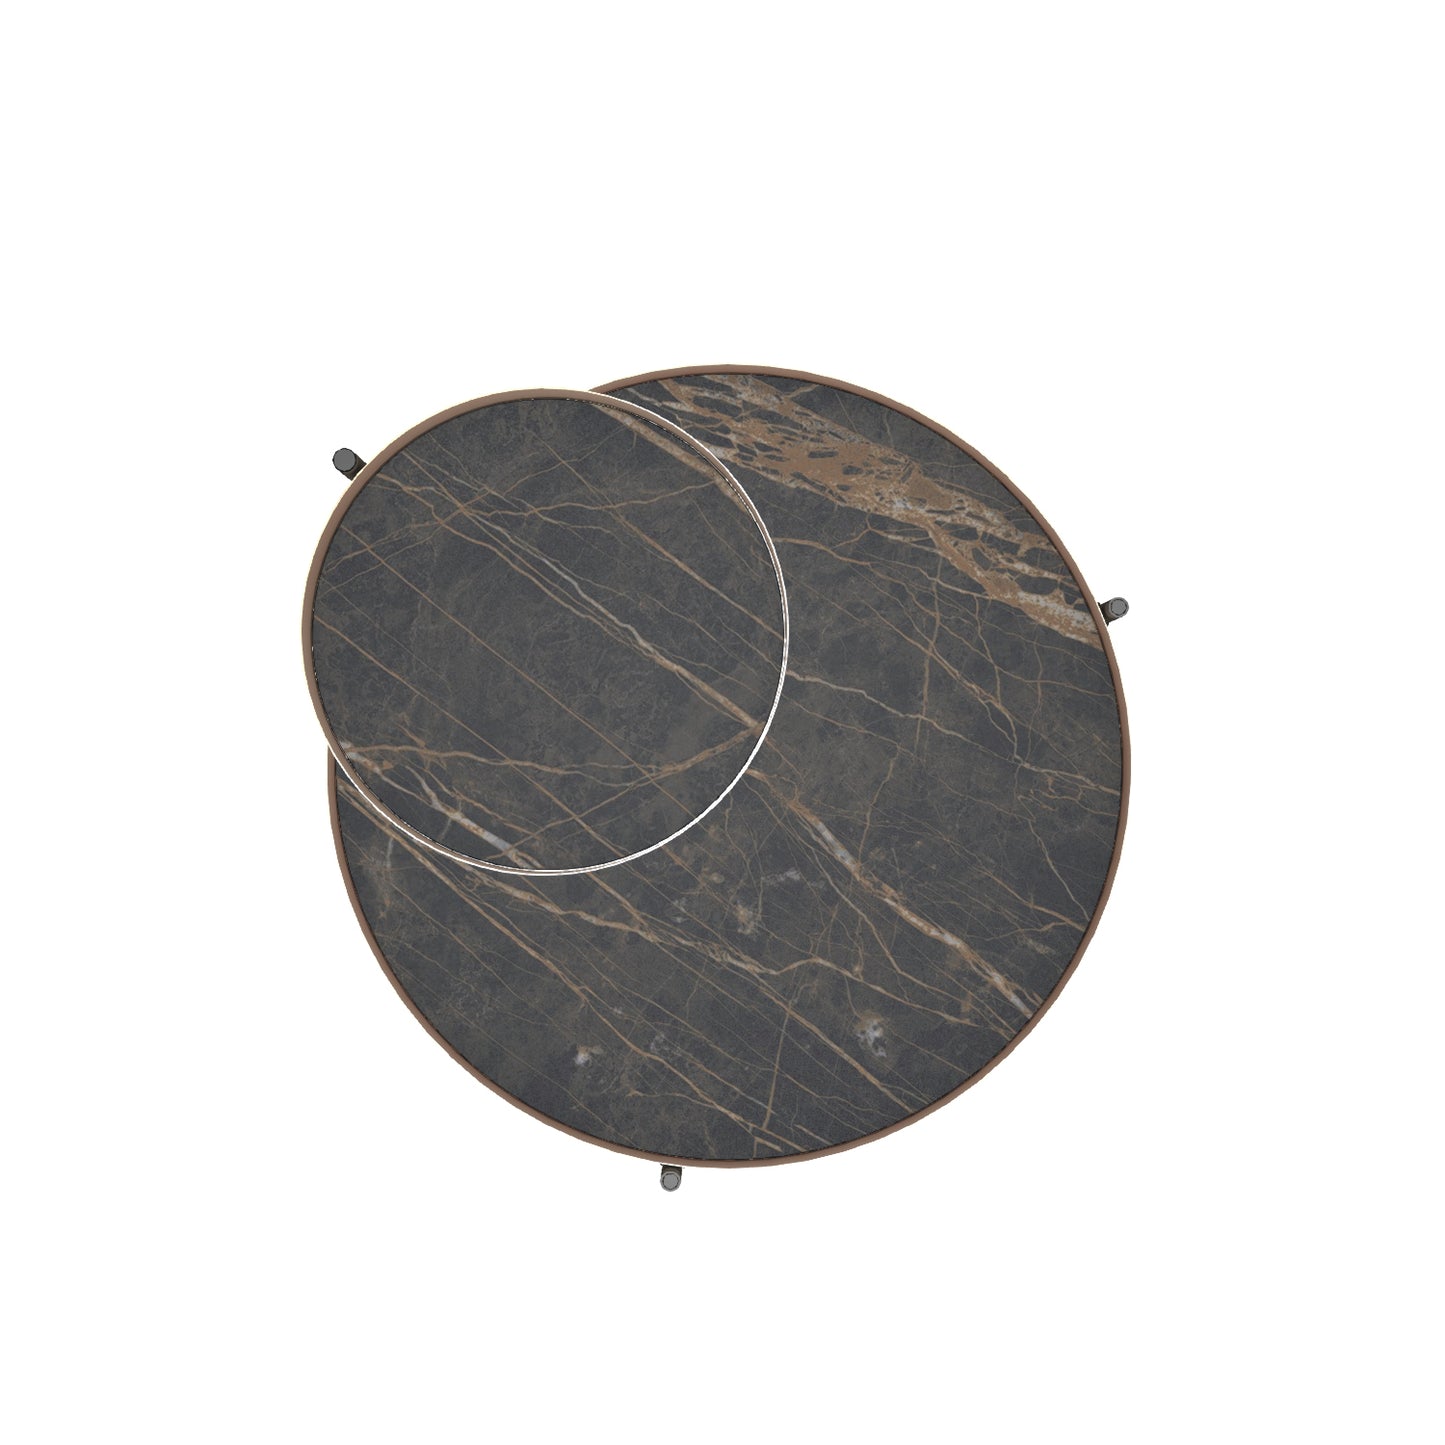 Planet Coffee Table By Bontempi Casa - Matte Noir Desir Super Marble With Rose Gold Base